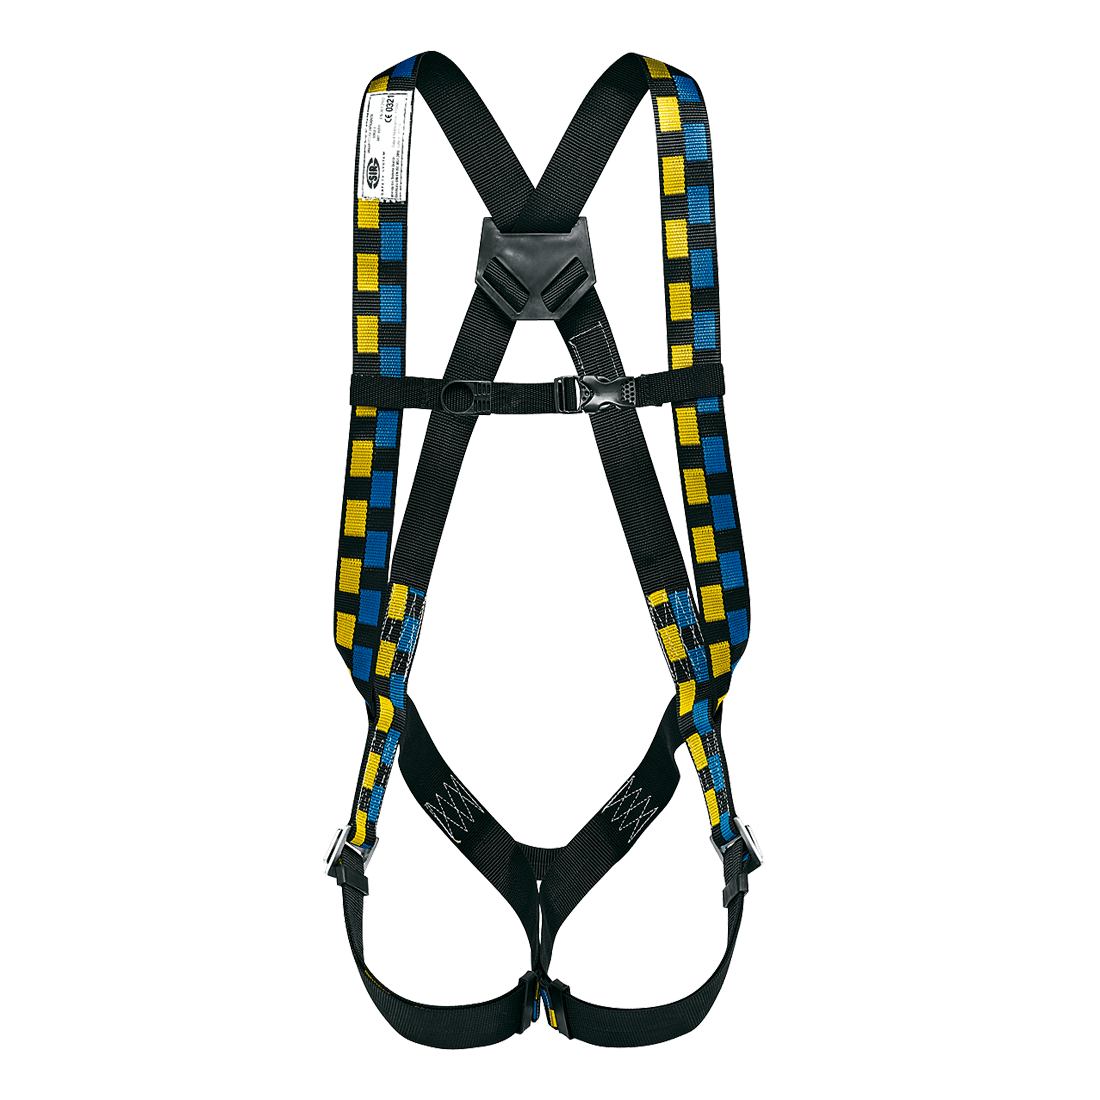 SOKOI 1 SAFETY HARNESS